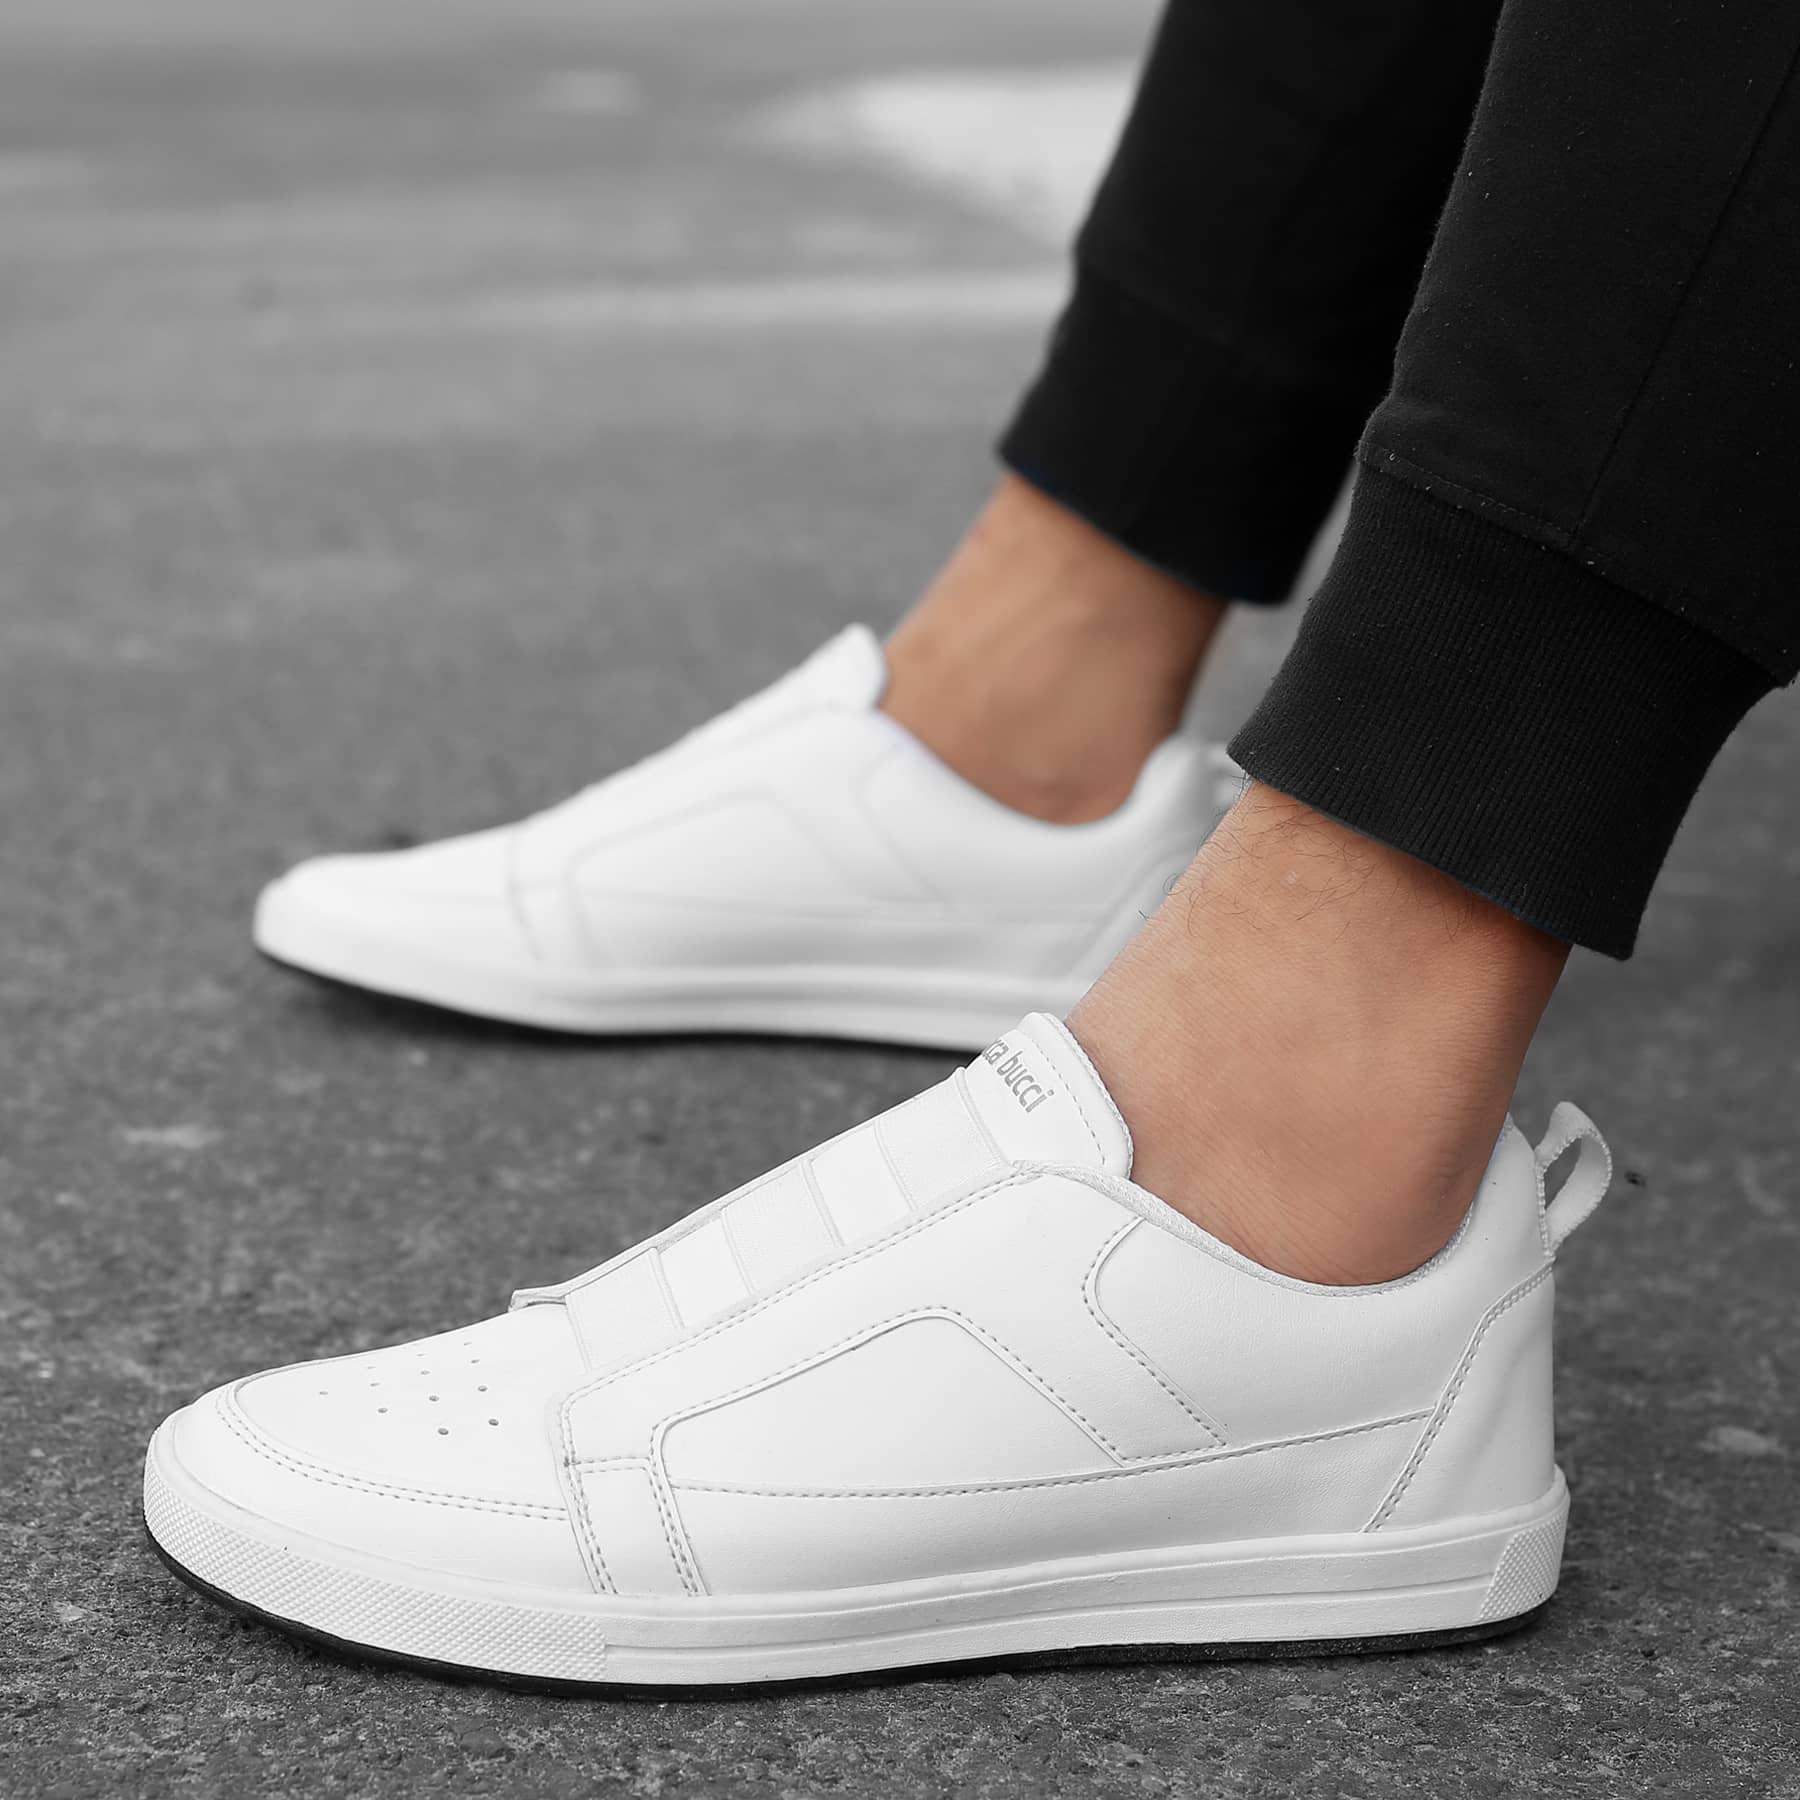 Puma Sports Shoes  Sneakers  Buy Puma Rebound Street v2 Unisex White  Casual Shoes Online  Nykaa Fashion